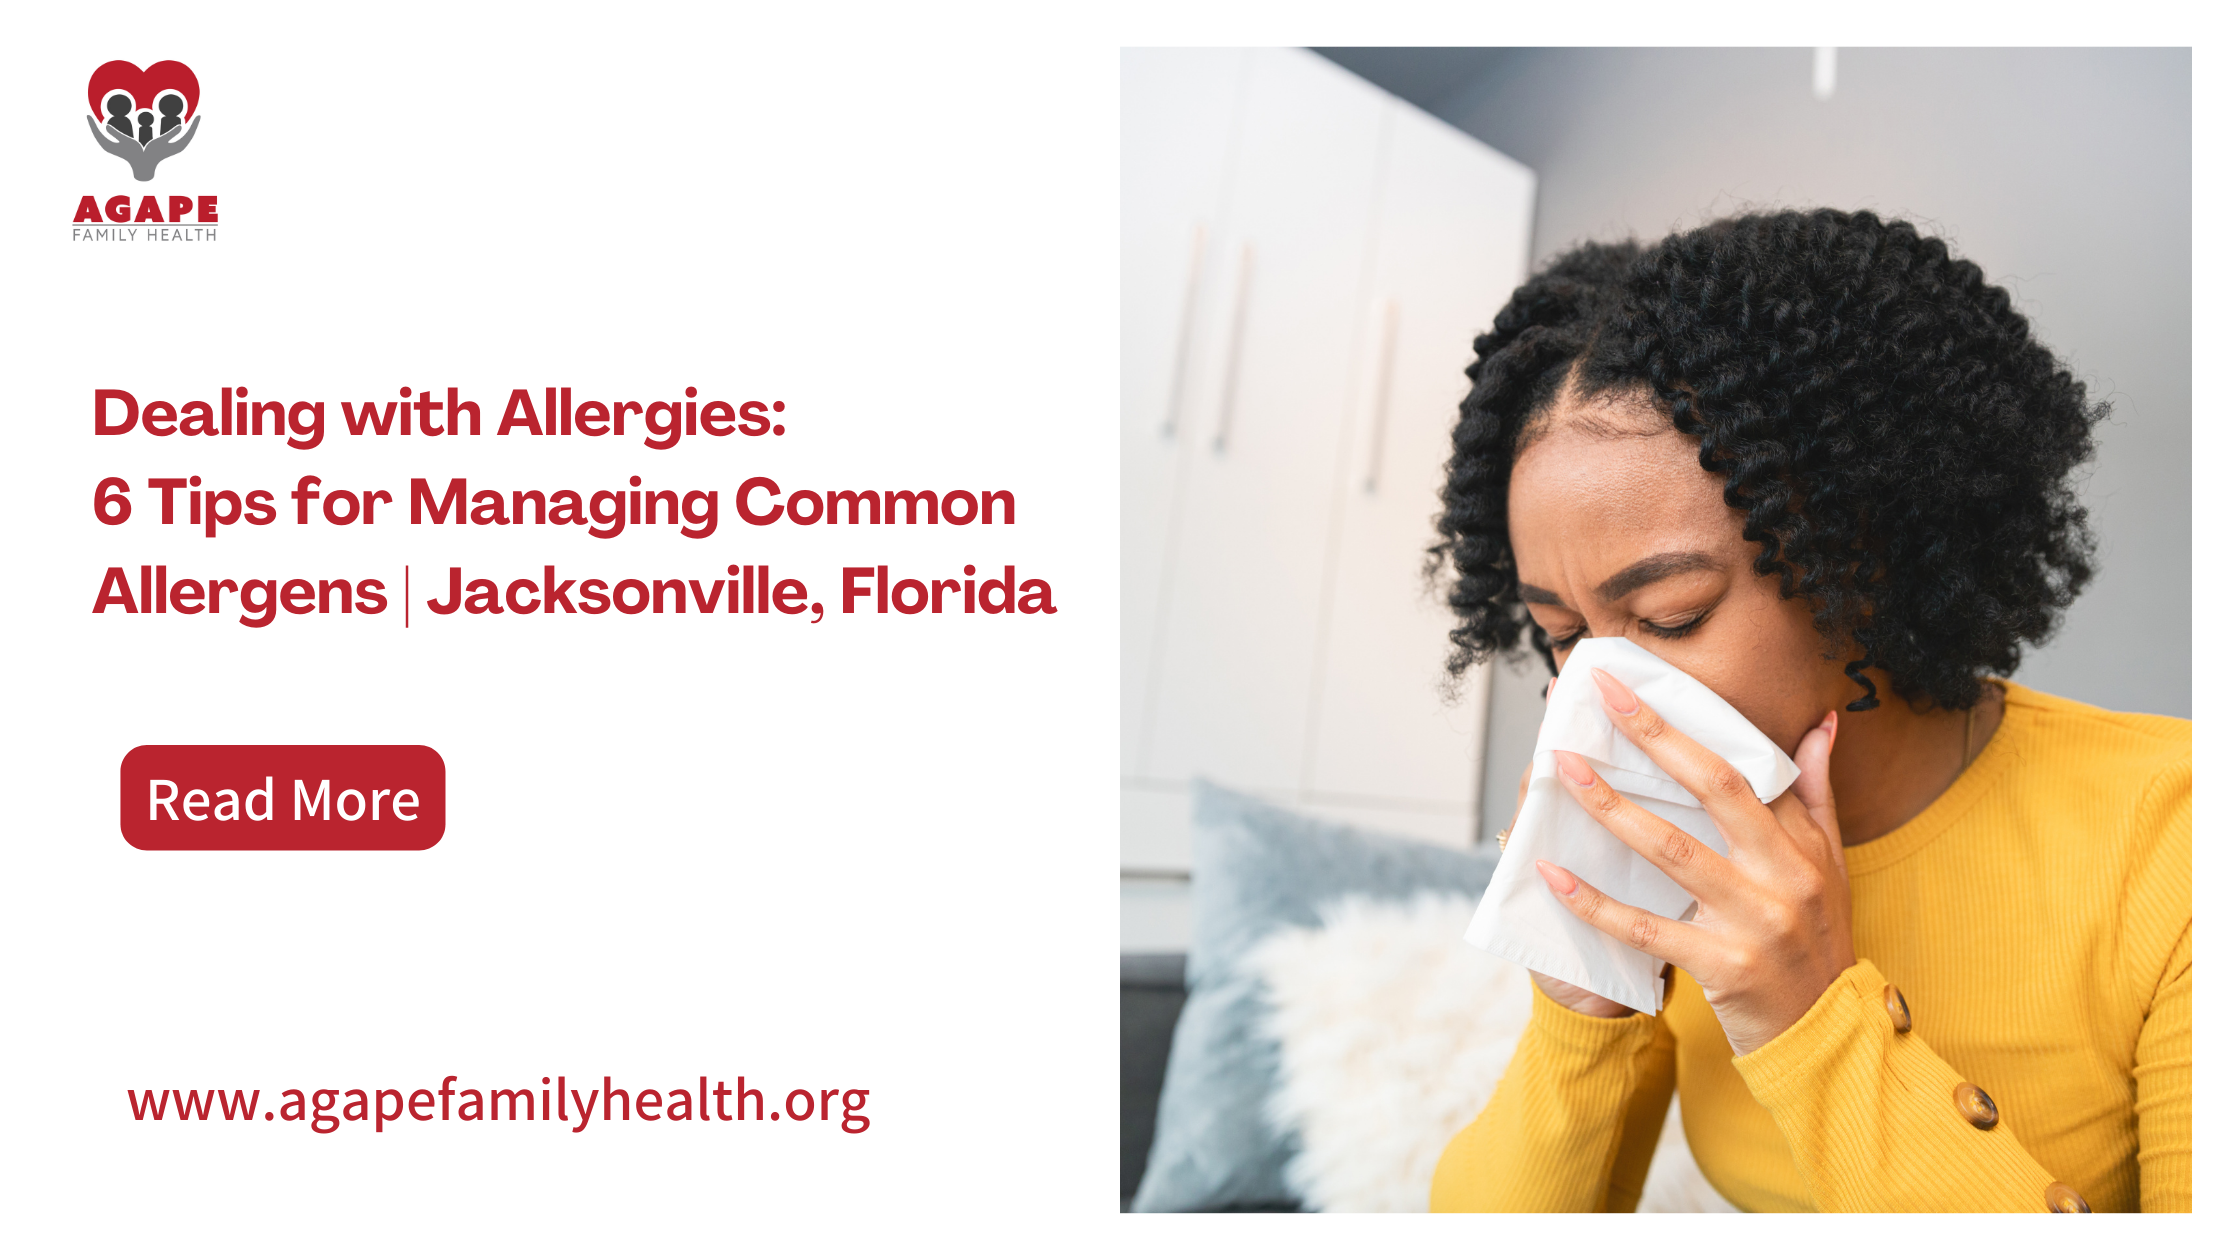 Allergies are a common health problem affecting millions of people worldwide. They occur when the immune system reacts to normally harmless substances, such as pollen, dust, or certain foods. A wide range of allergens can trigger allergies, and their symptoms can range from mild to severe, sometimes even life-threatening.